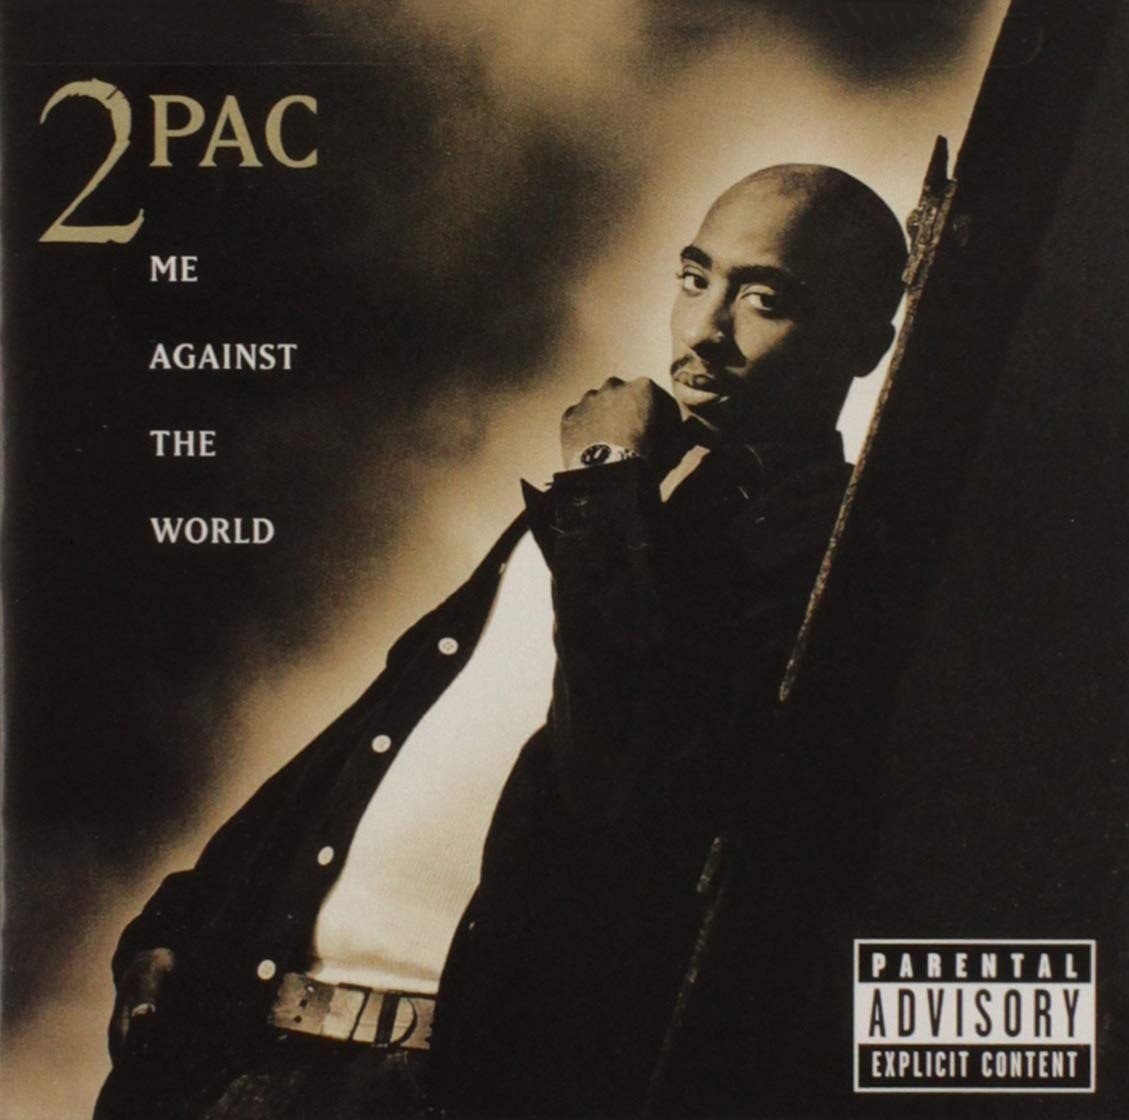 CD Shop - 2 PAC ME AGAINST THE WORLD